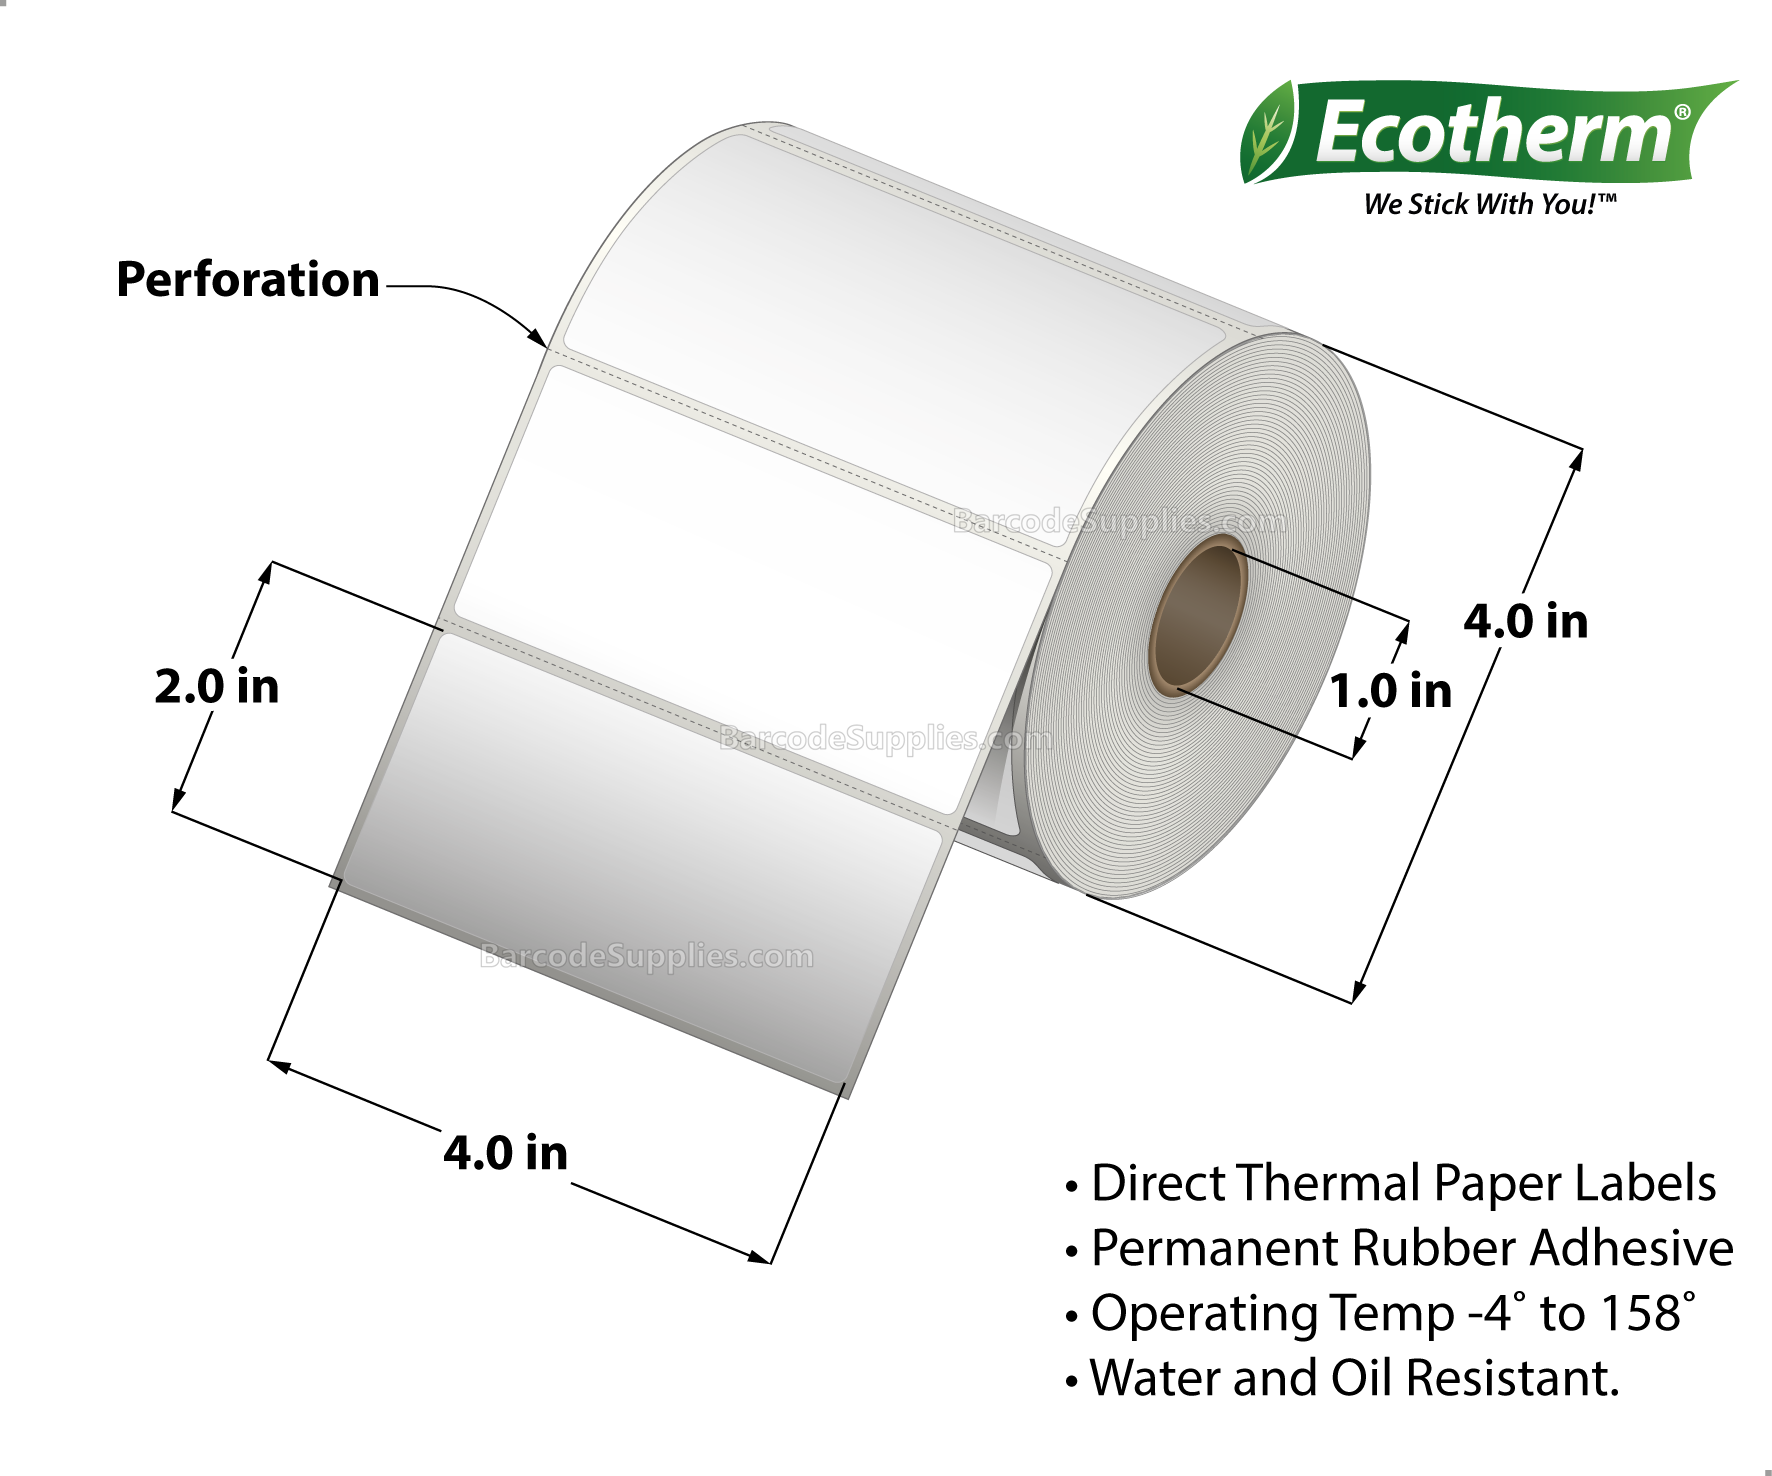 4 x 2 Direct Thermal White Labels With Rubber Adhesive - Perforated - 760 Labels Per Roll - Carton Of 4 Rolls - 3040 Labels Total - MPN: ECOTHERM14127-4